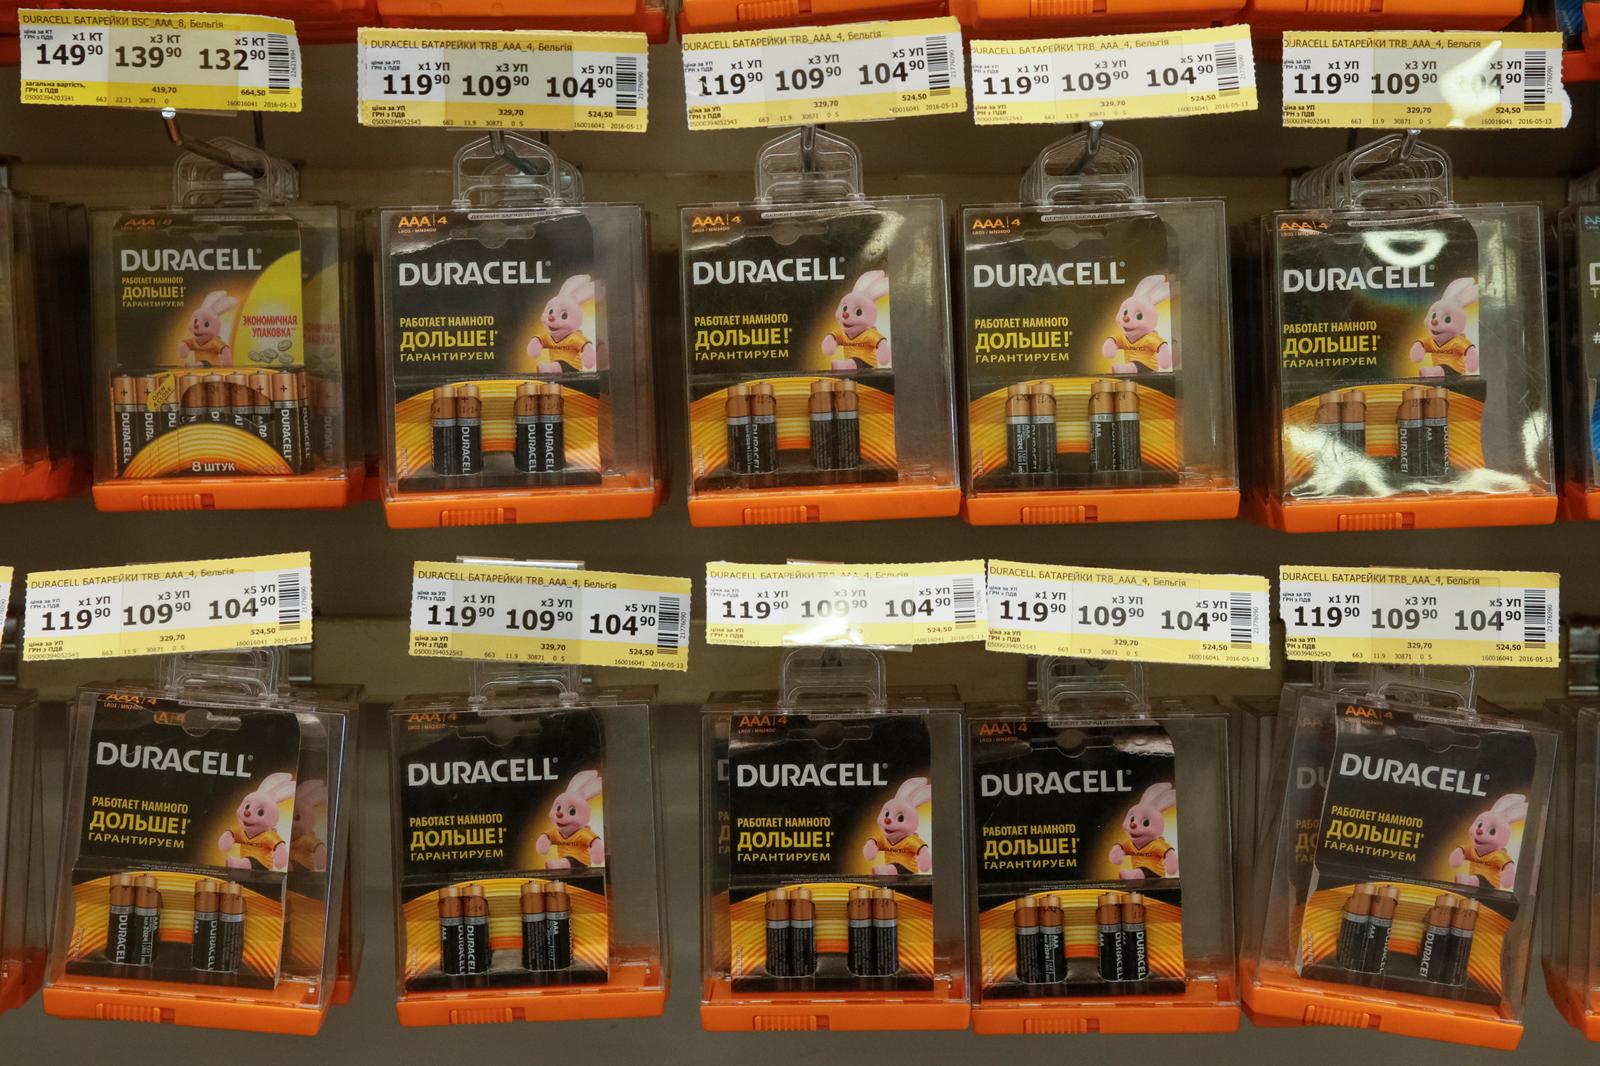 Duracell, Energizer end lawsuits over battery life claims